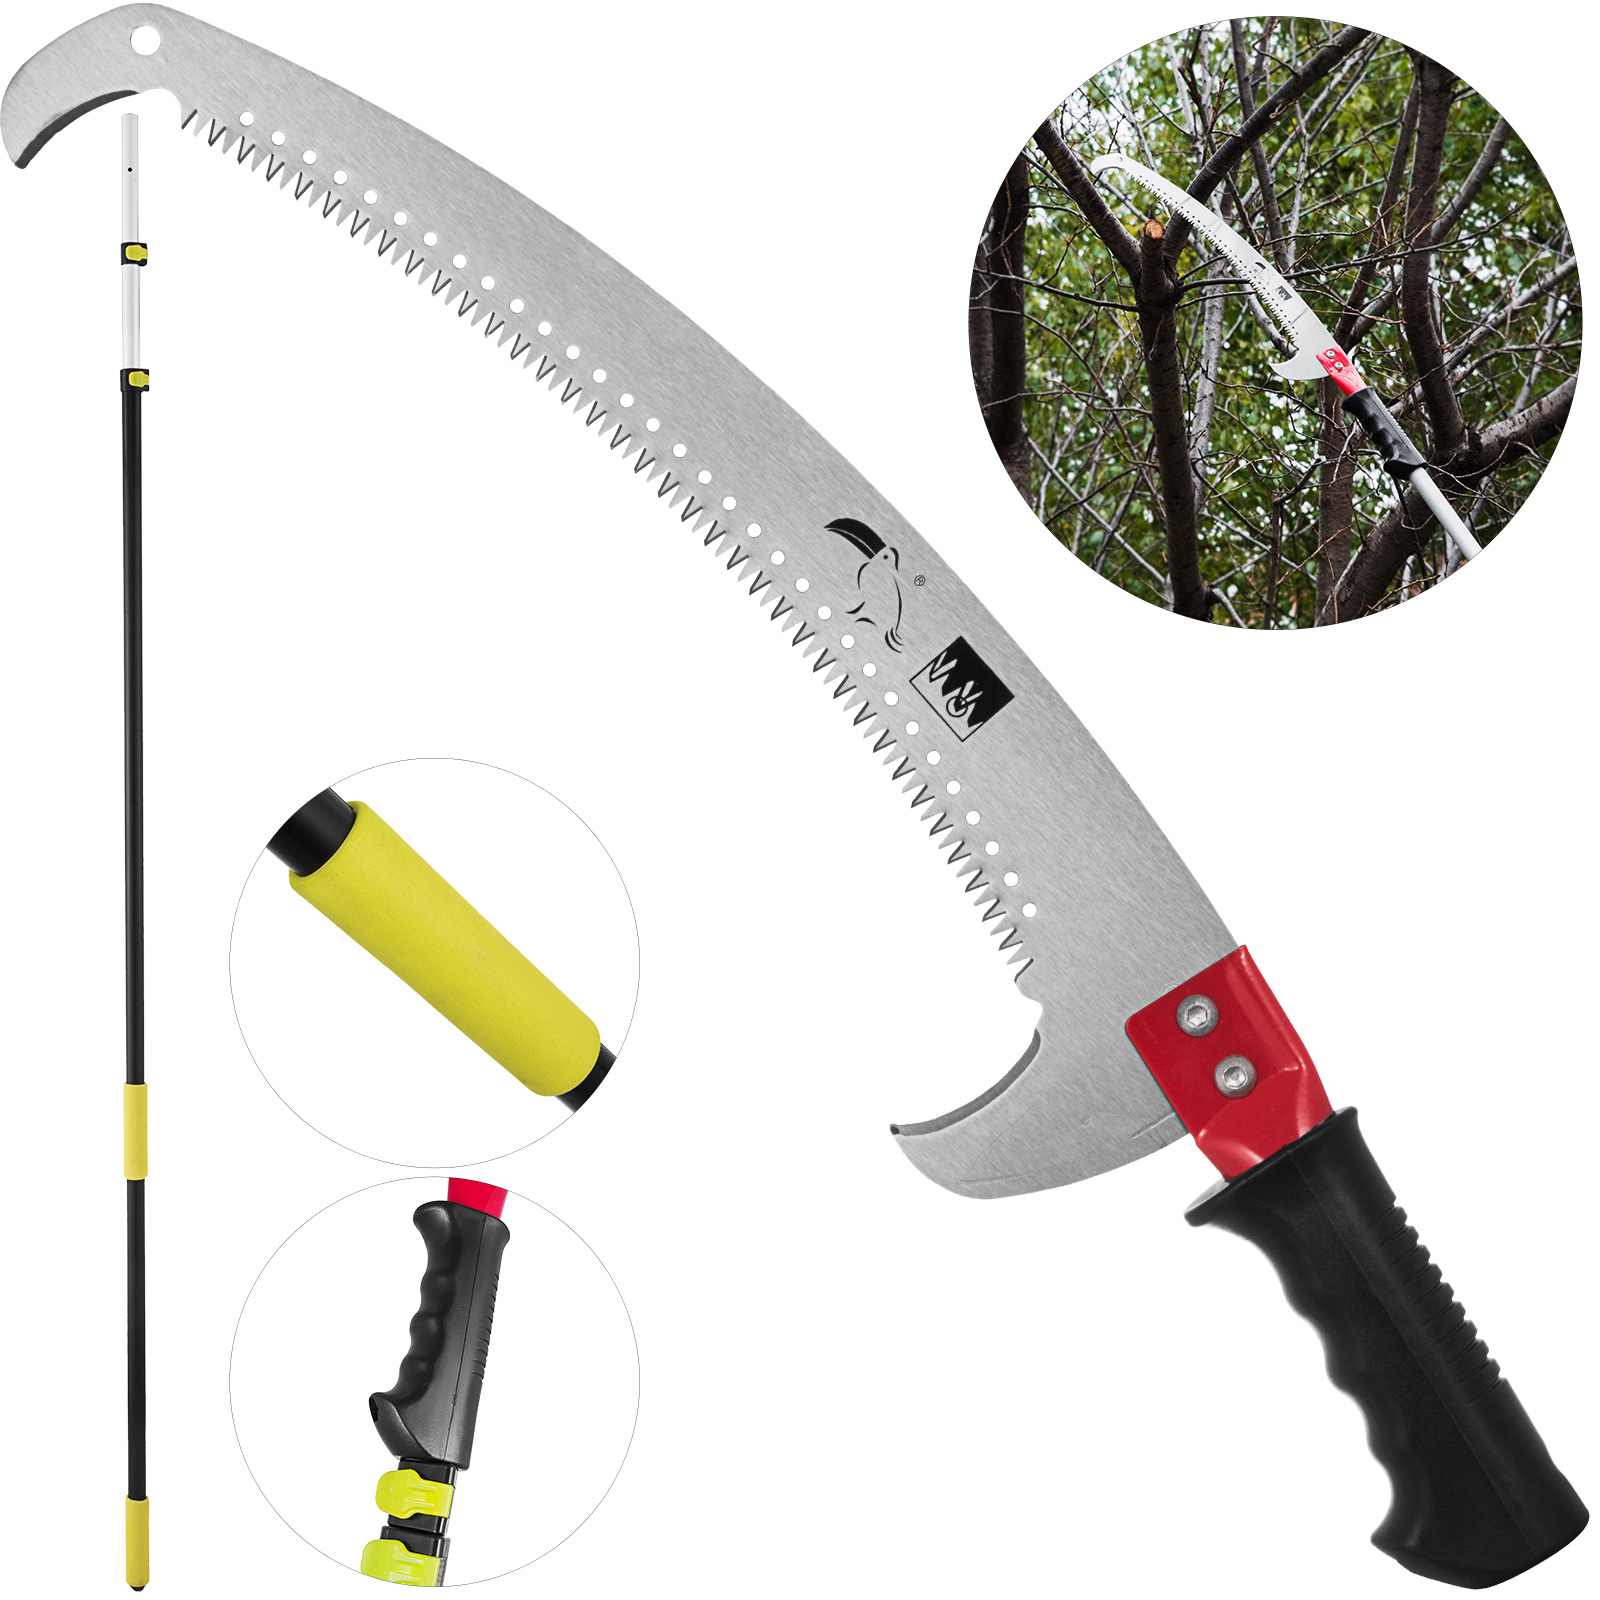 6-19.7ft Tree Pruner Telescopic Pole Saw 23 Inch Curved Saw Blade Forestry от Vevor Many GEOs